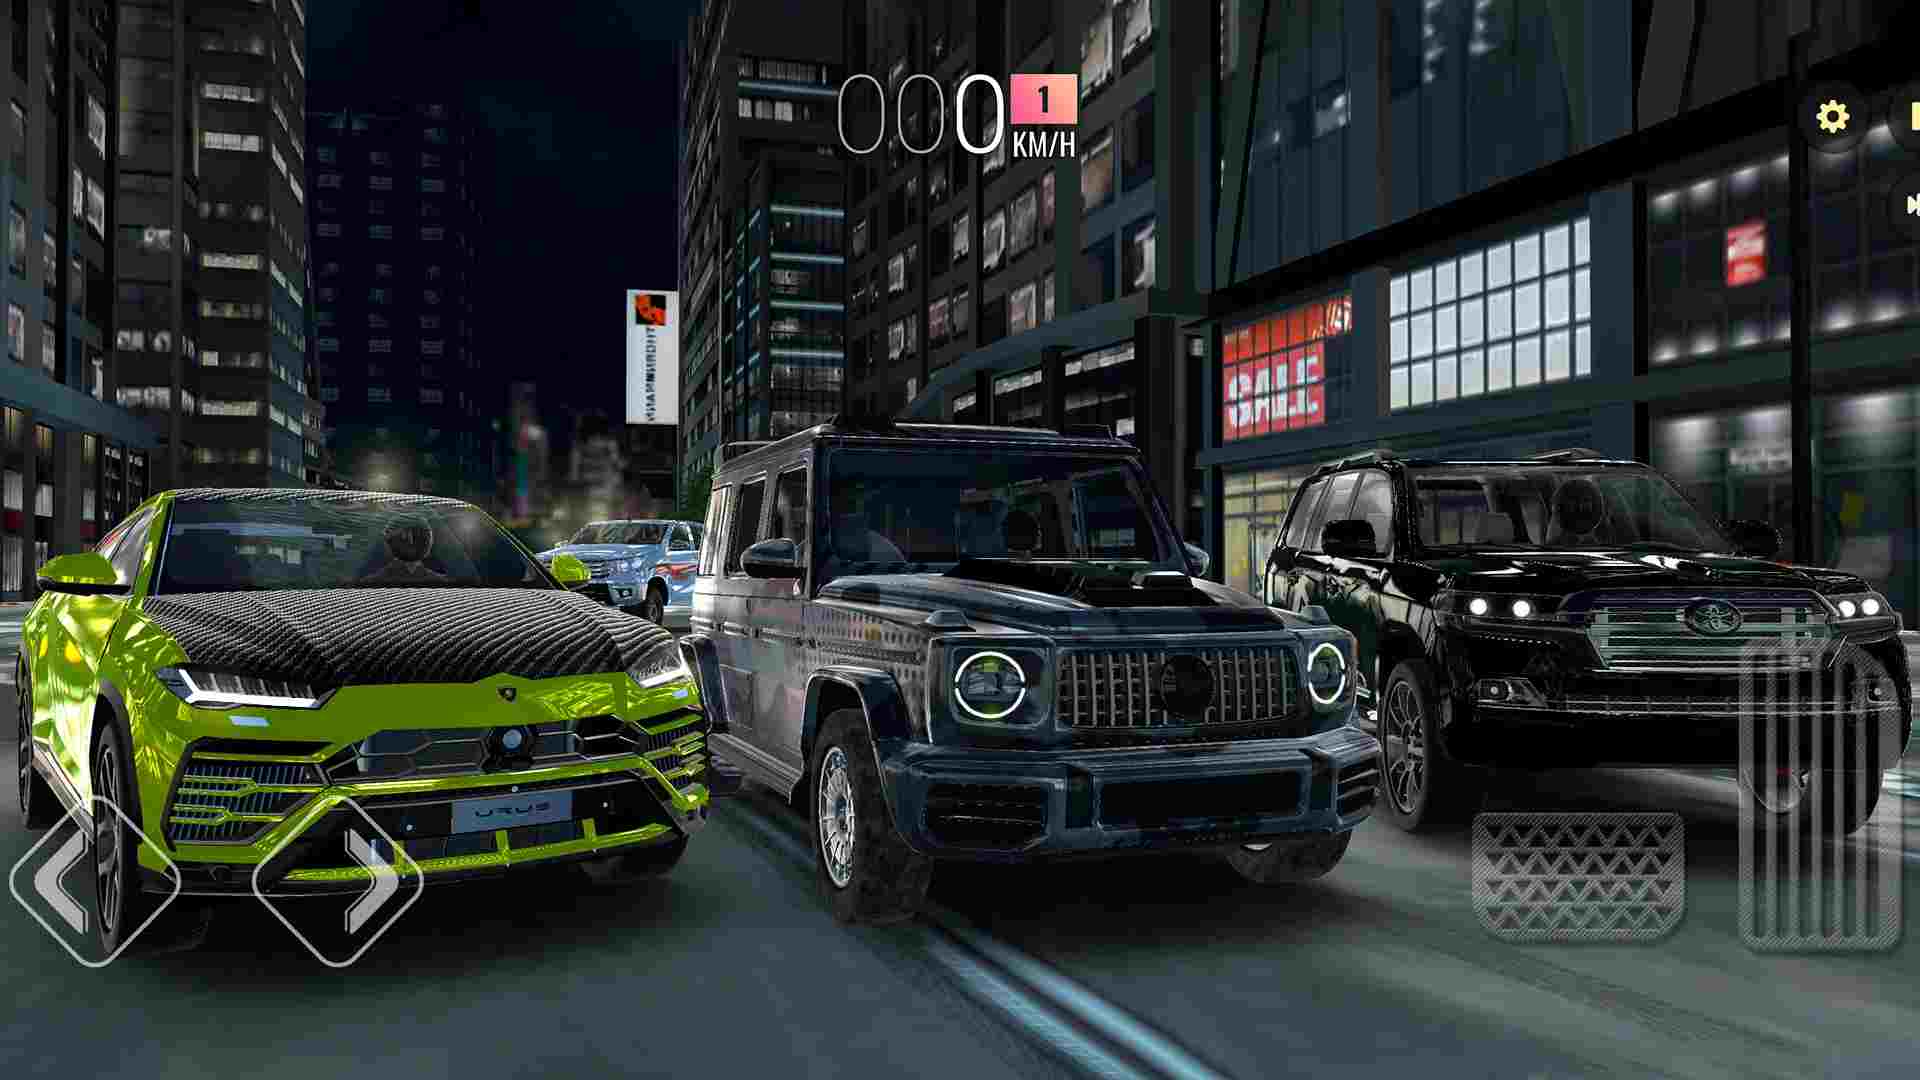 Racing in Car MOD APK – Multiplayer 0.5 APK MOD [Huge Amount Of Money and gold, multiplayer unlocked, no ads]